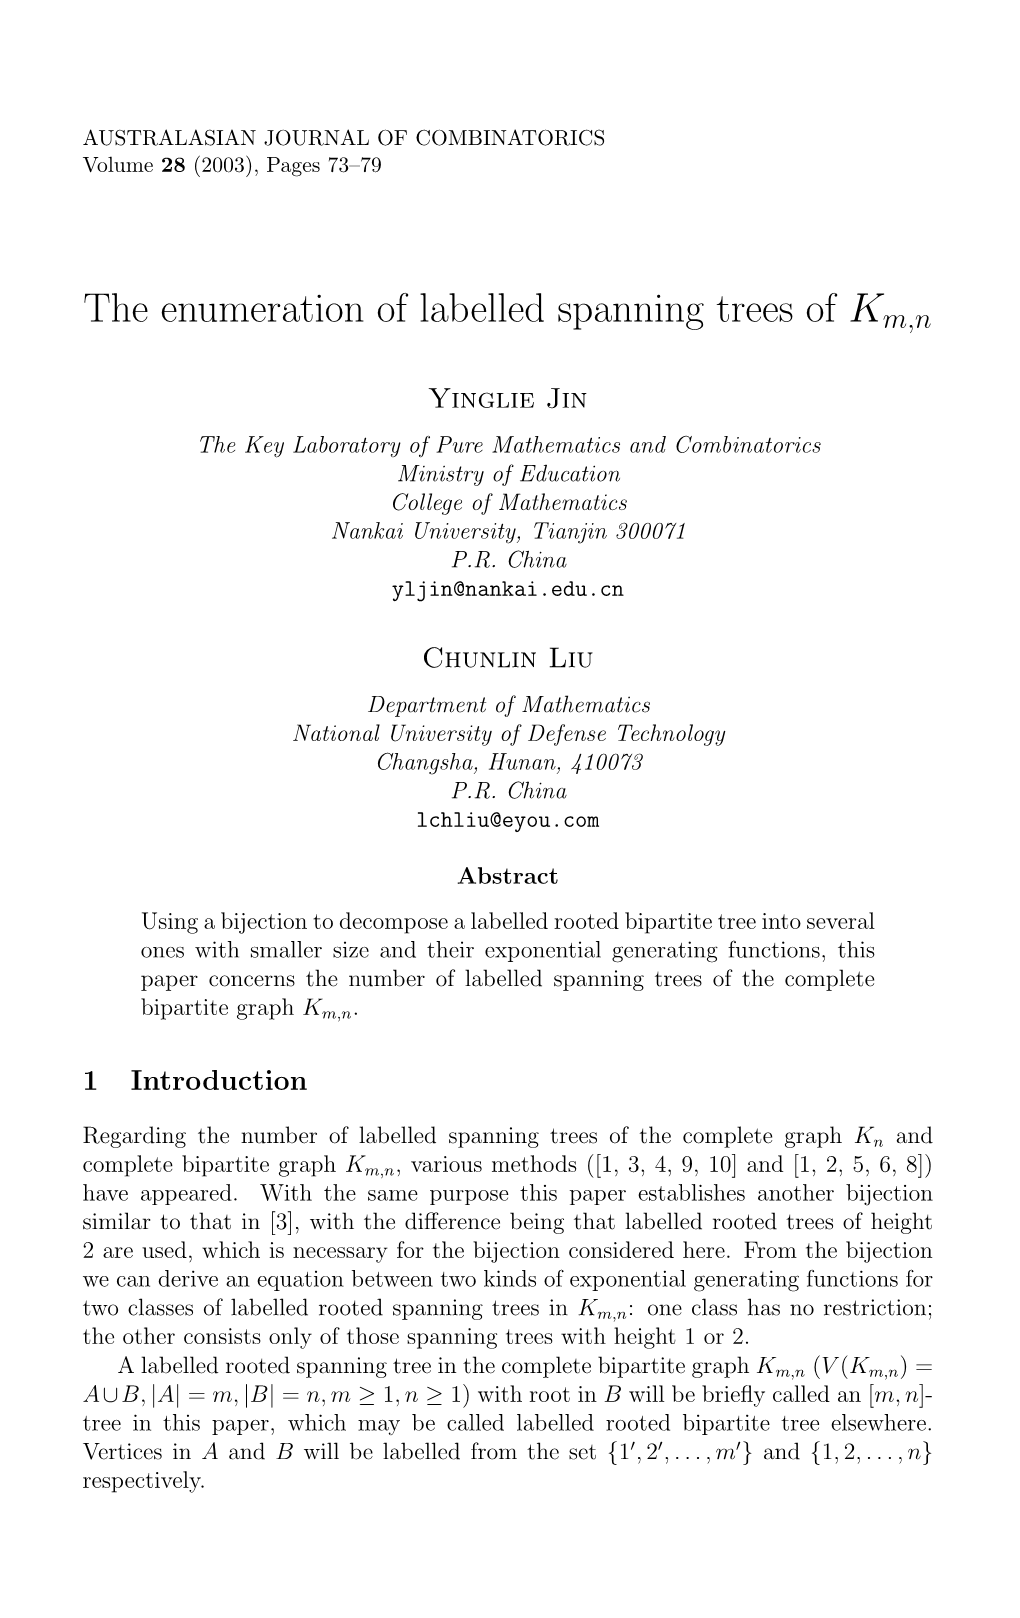 The Enumeration of Labelled Spanning Trees of Km,N